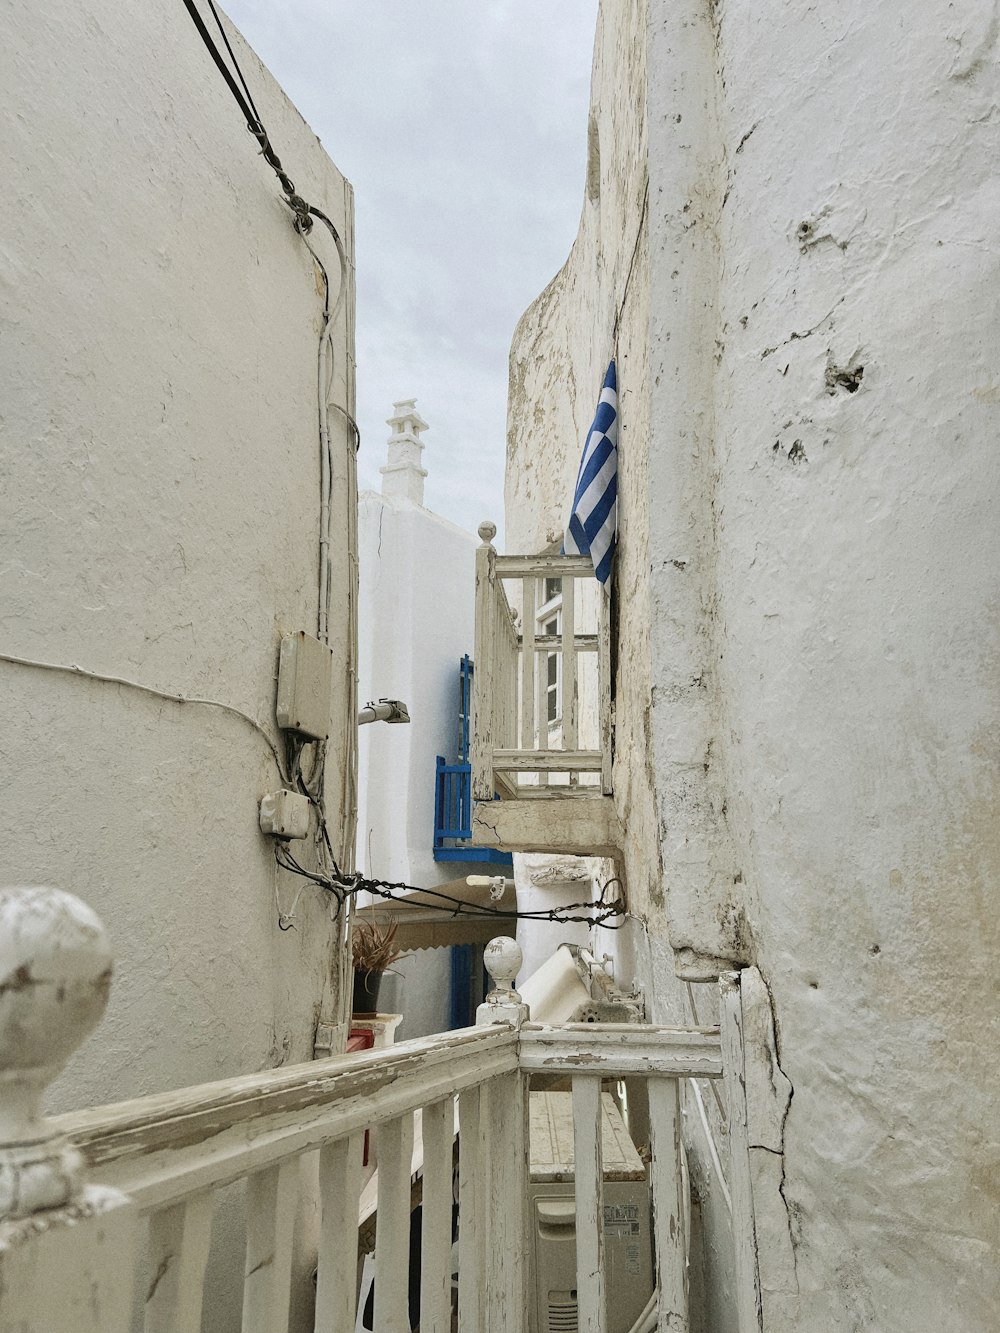 a narrow alleyway with white buildings and blue shutters